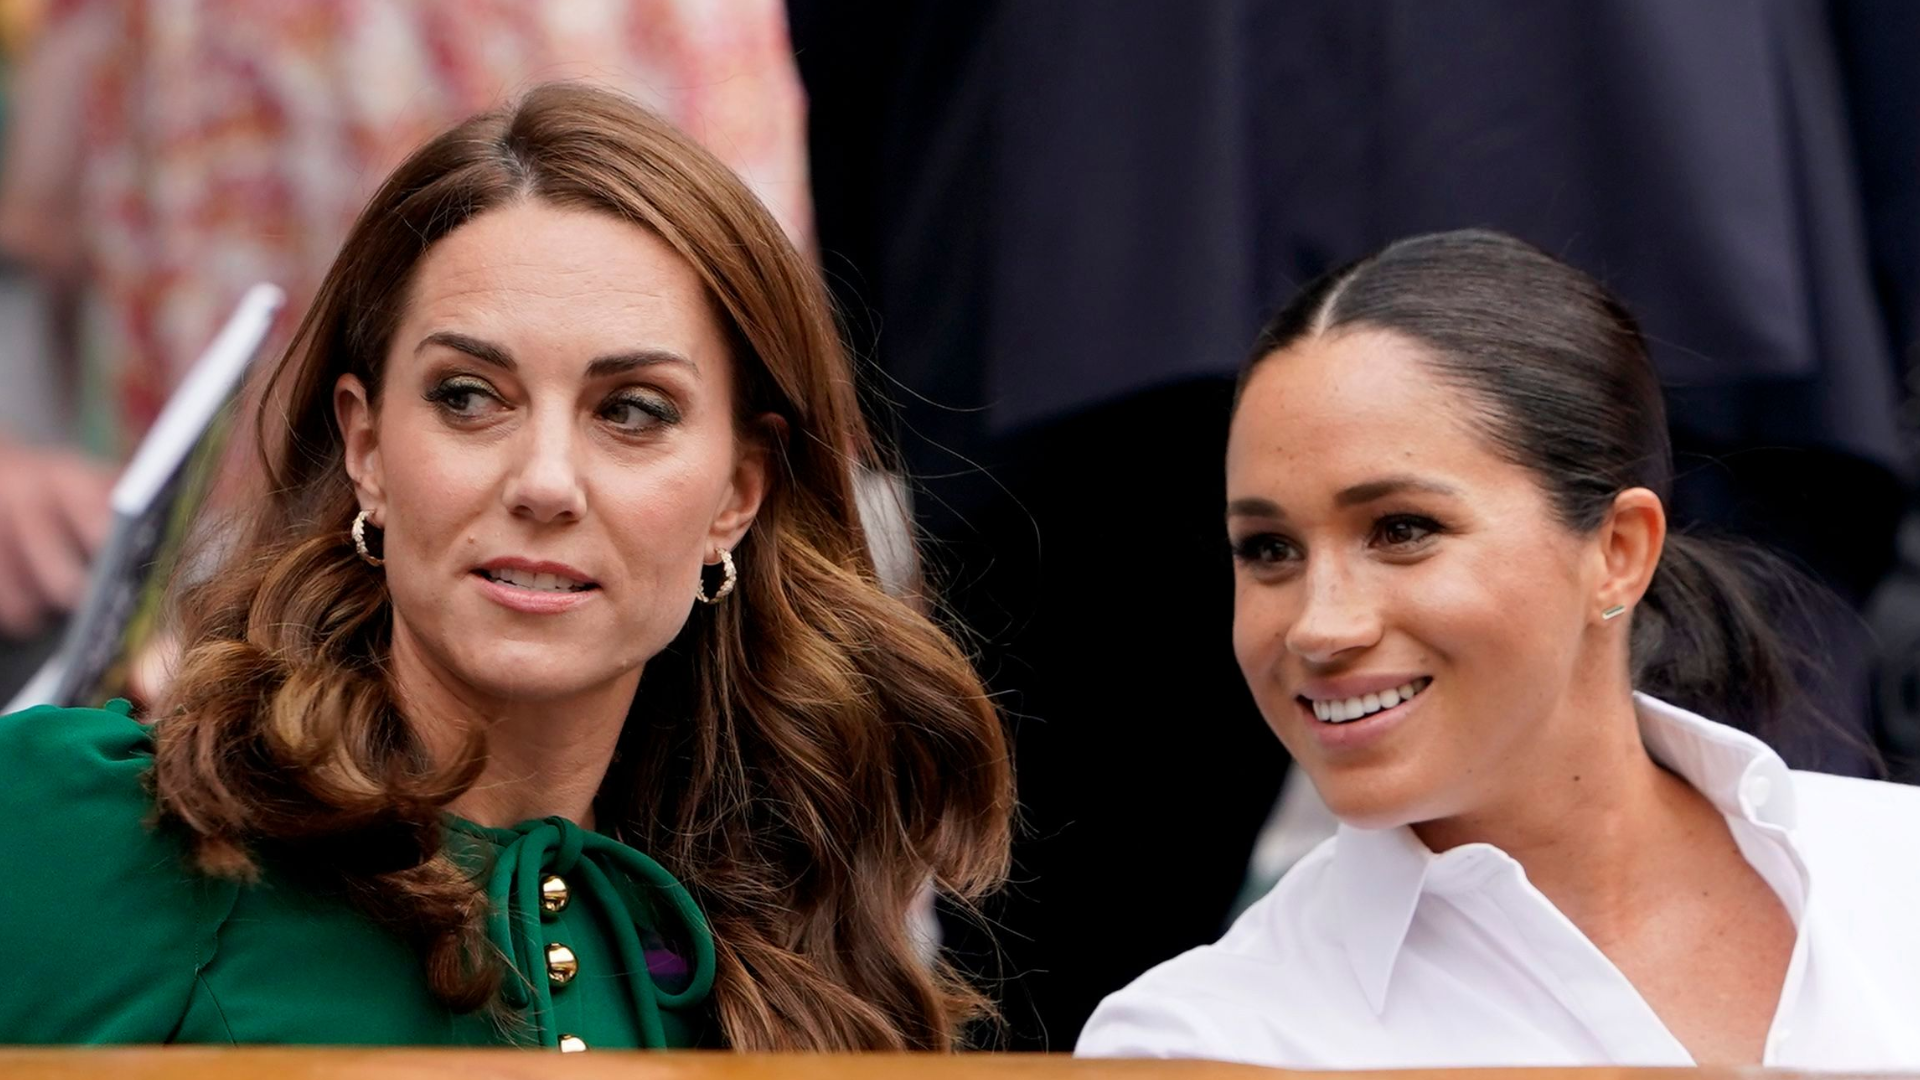 Meghan Markle's Product Launch Overlaps with Kate Middleton's Appearance, Sparks Controversy